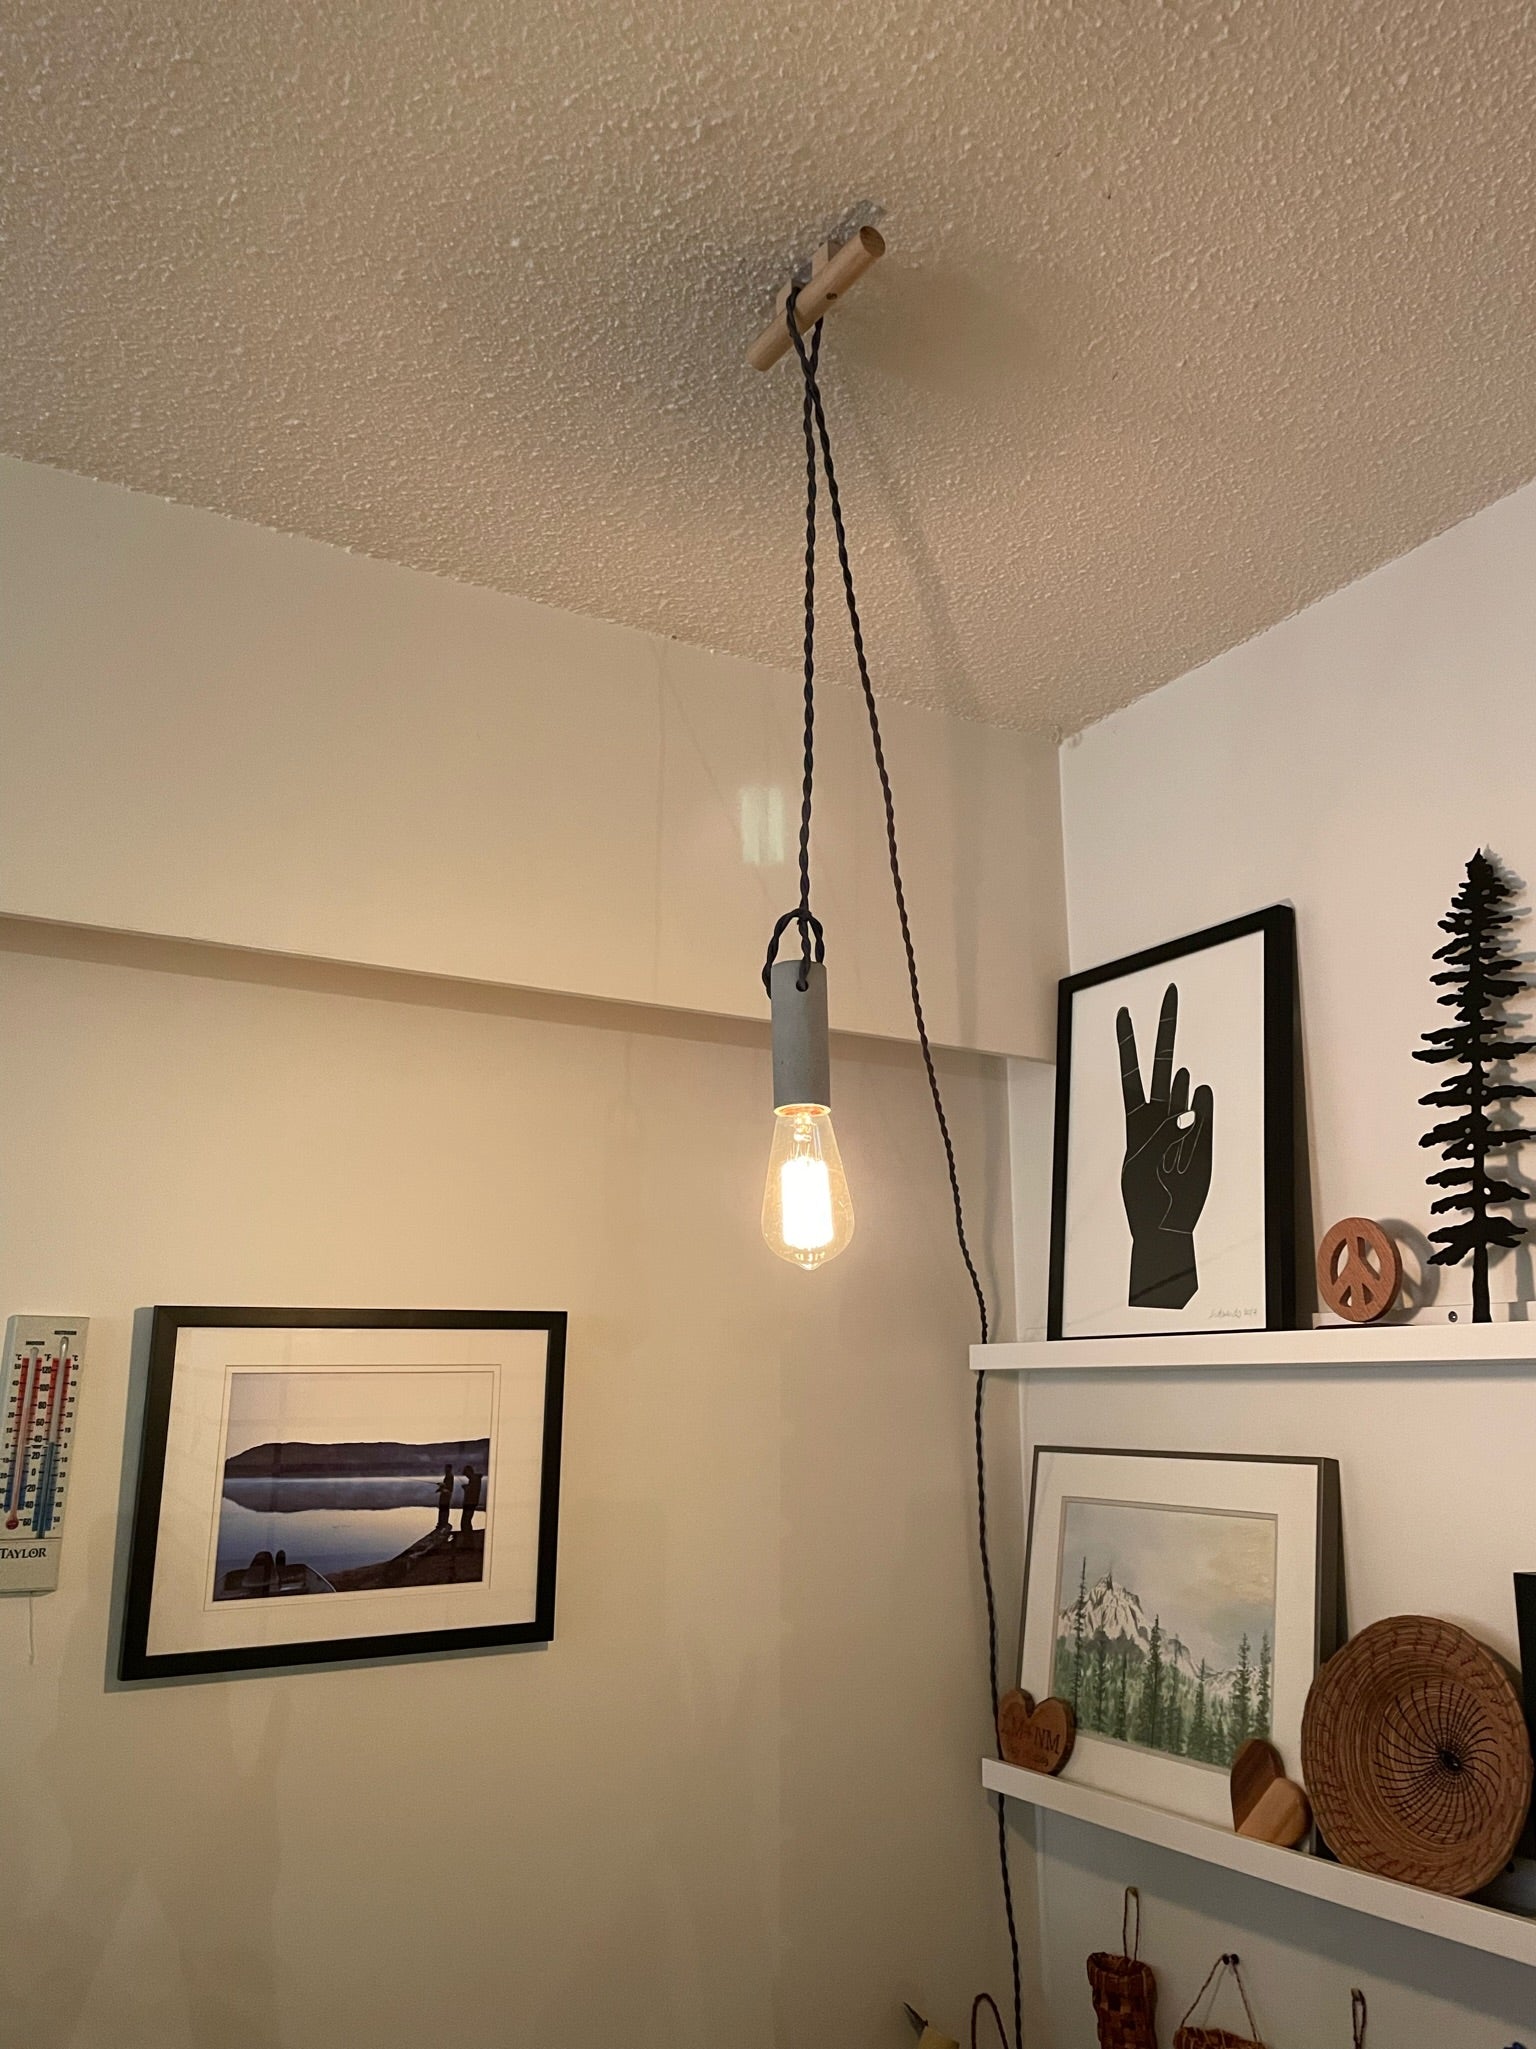 wrk-shp Concrete Pendant Light With Wood Wall Cleat